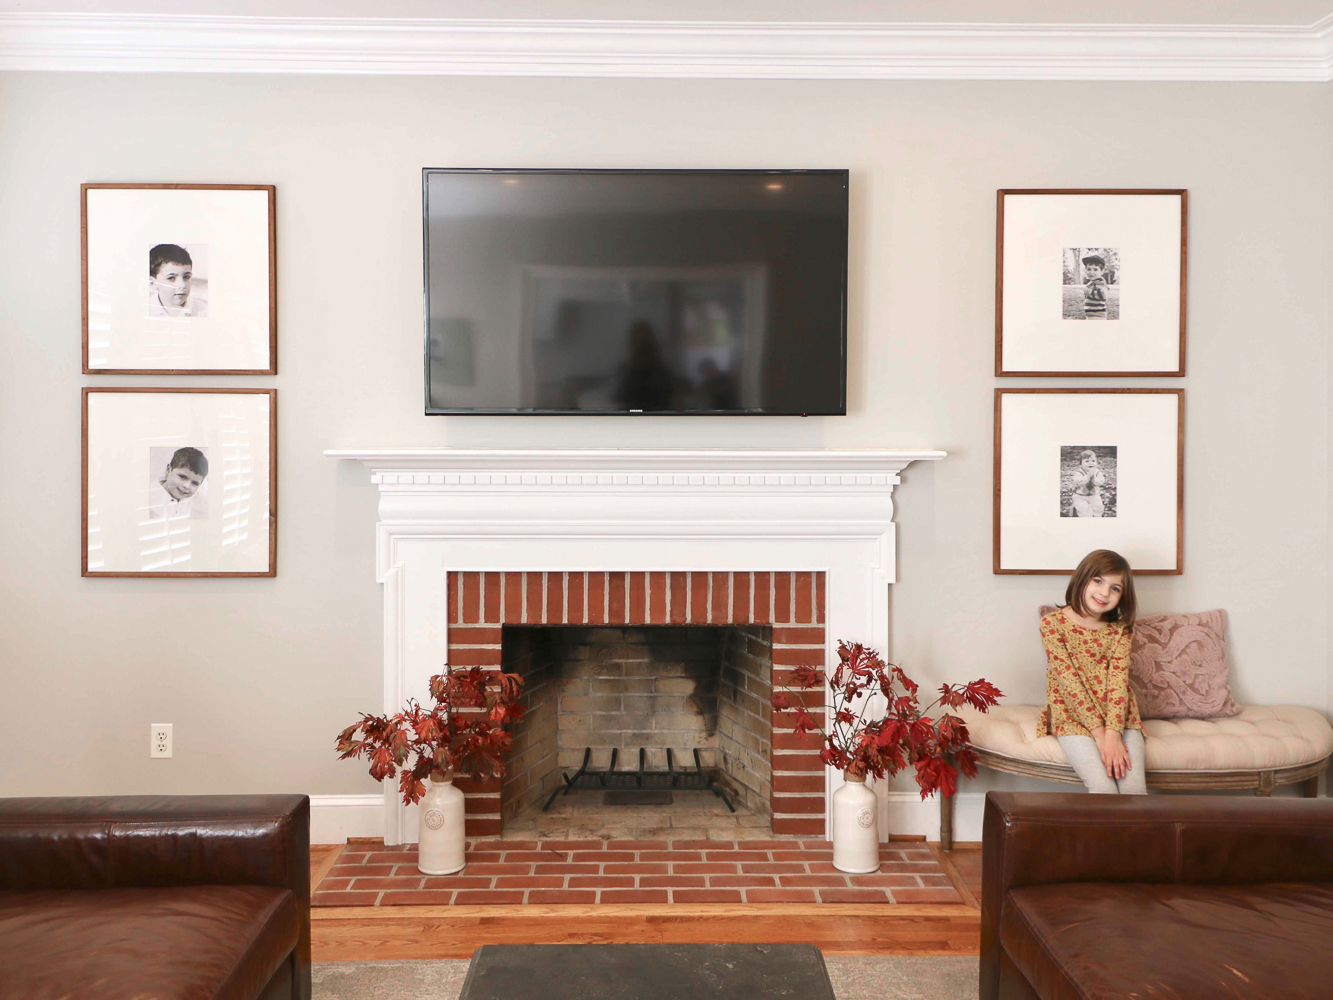 Brick fireplace with oversized framed family photos and tv above fireplace, tufted demilune bench on right side. Wall paint - Sherwin Williams Agreeable Gray